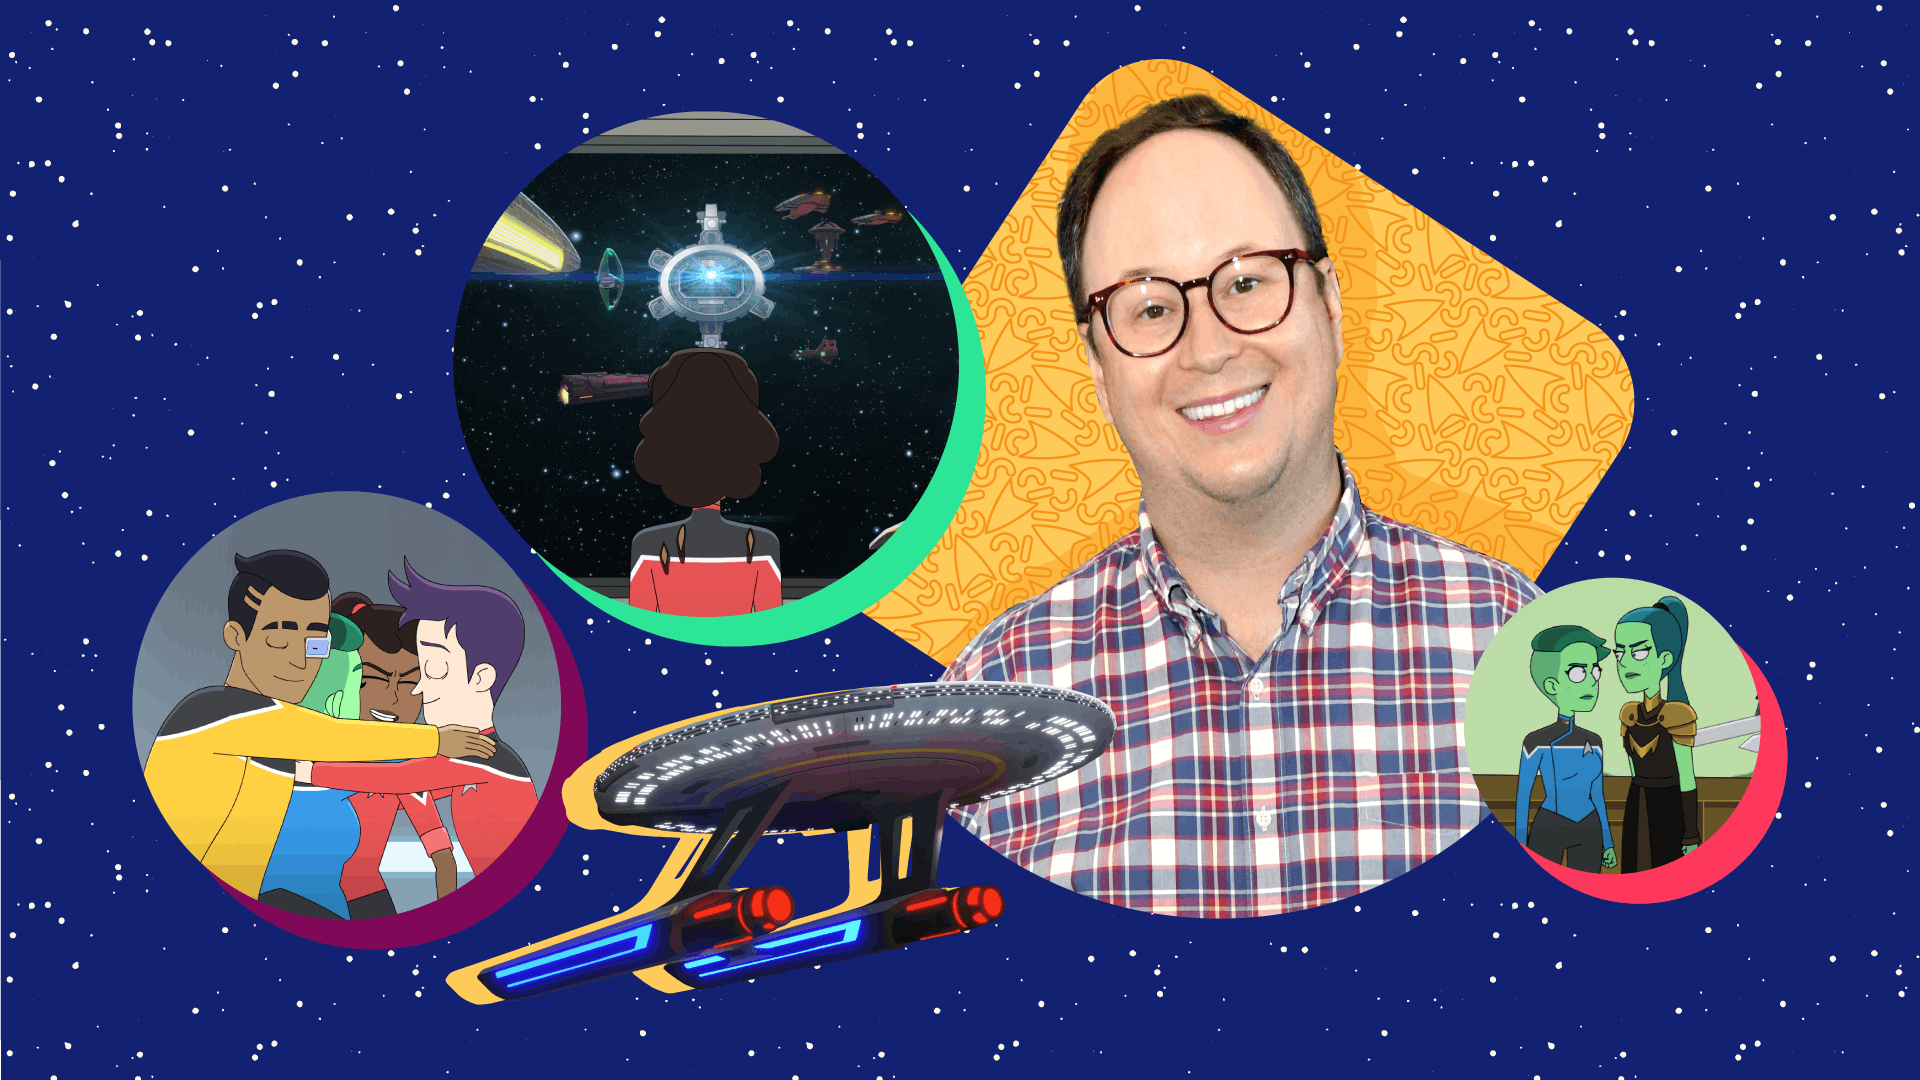 Illustrated banner featuring the Cerritos, Star Trek: Lower Decks showrunner Mike McMahan, and episodic stills from Season 4's finale